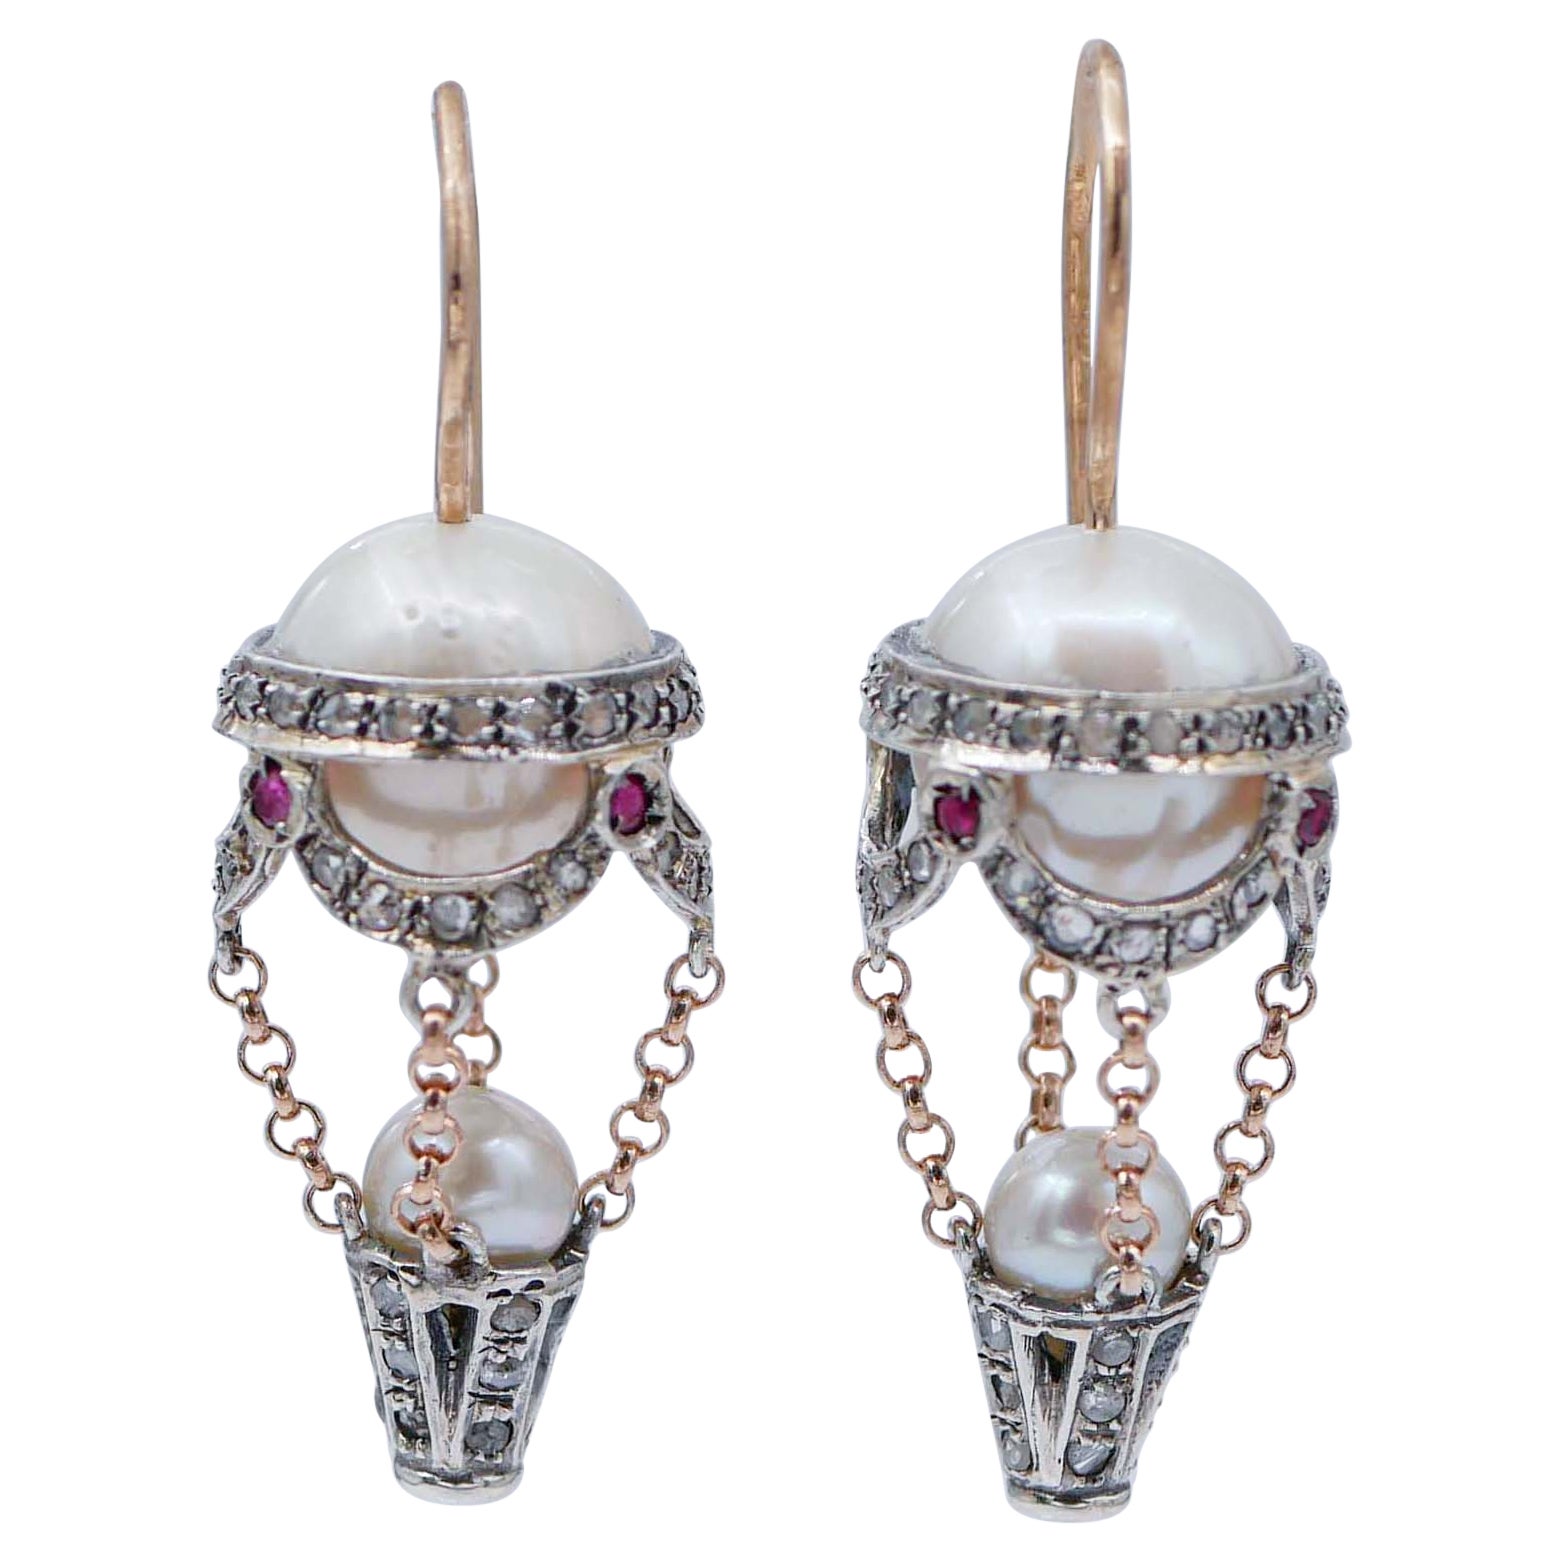 Pearls, Rubies, Diamonds, Rose Gold and Silver Hot Air Balloon Earrings